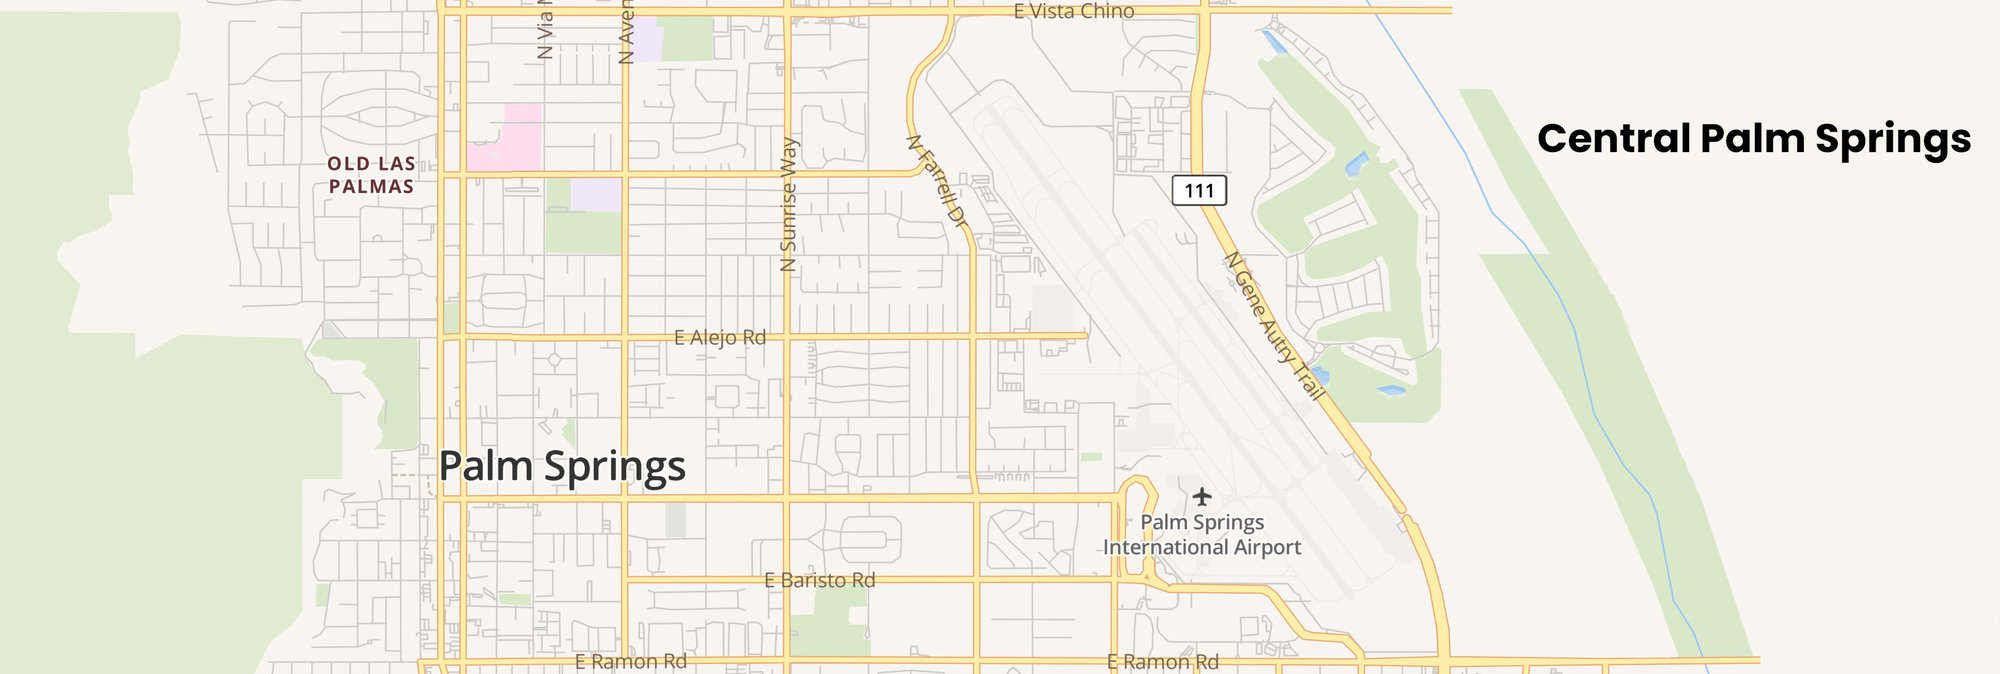 A map of Central Palm Springs